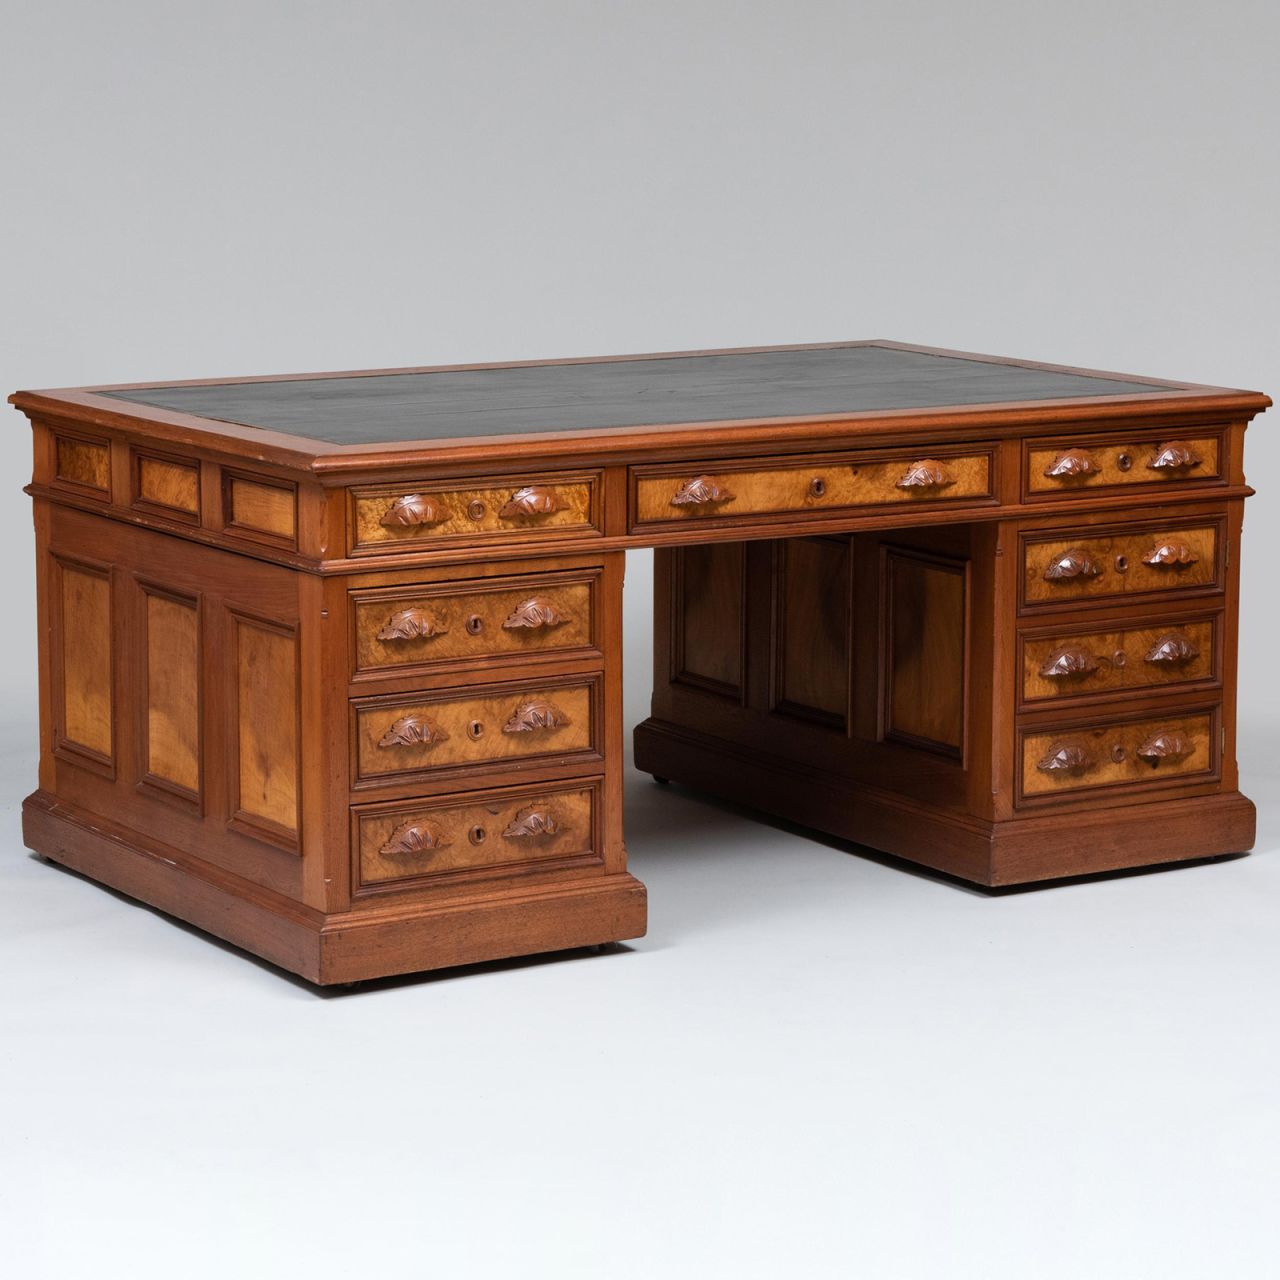 Among the items on the auction block is a 19th century desk built in California that Didion's parents had owned